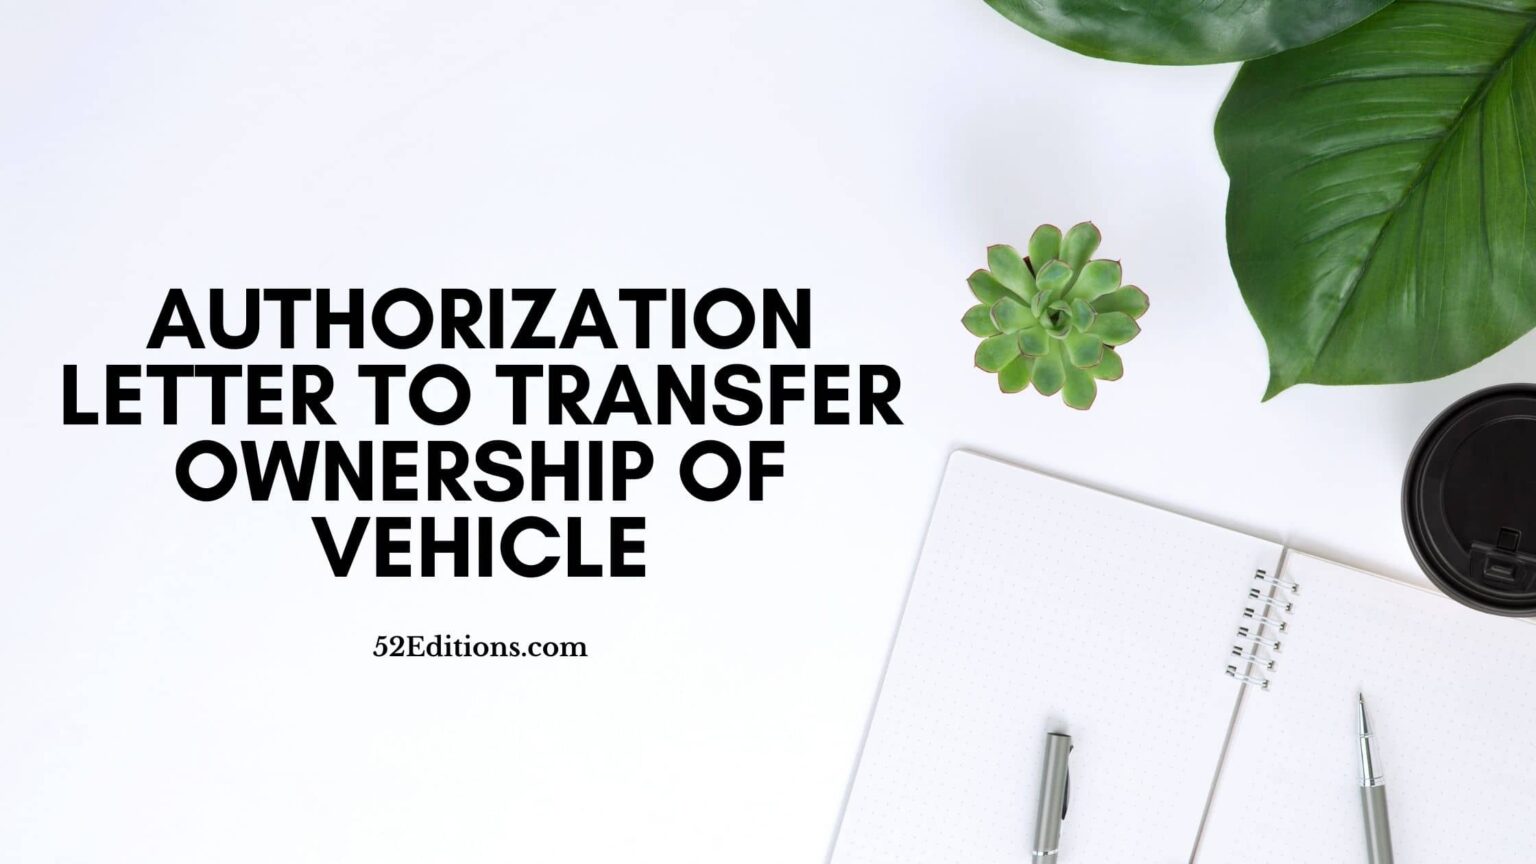 Sample Authorization Letter To Transfer Ownership of Vehicle // Get